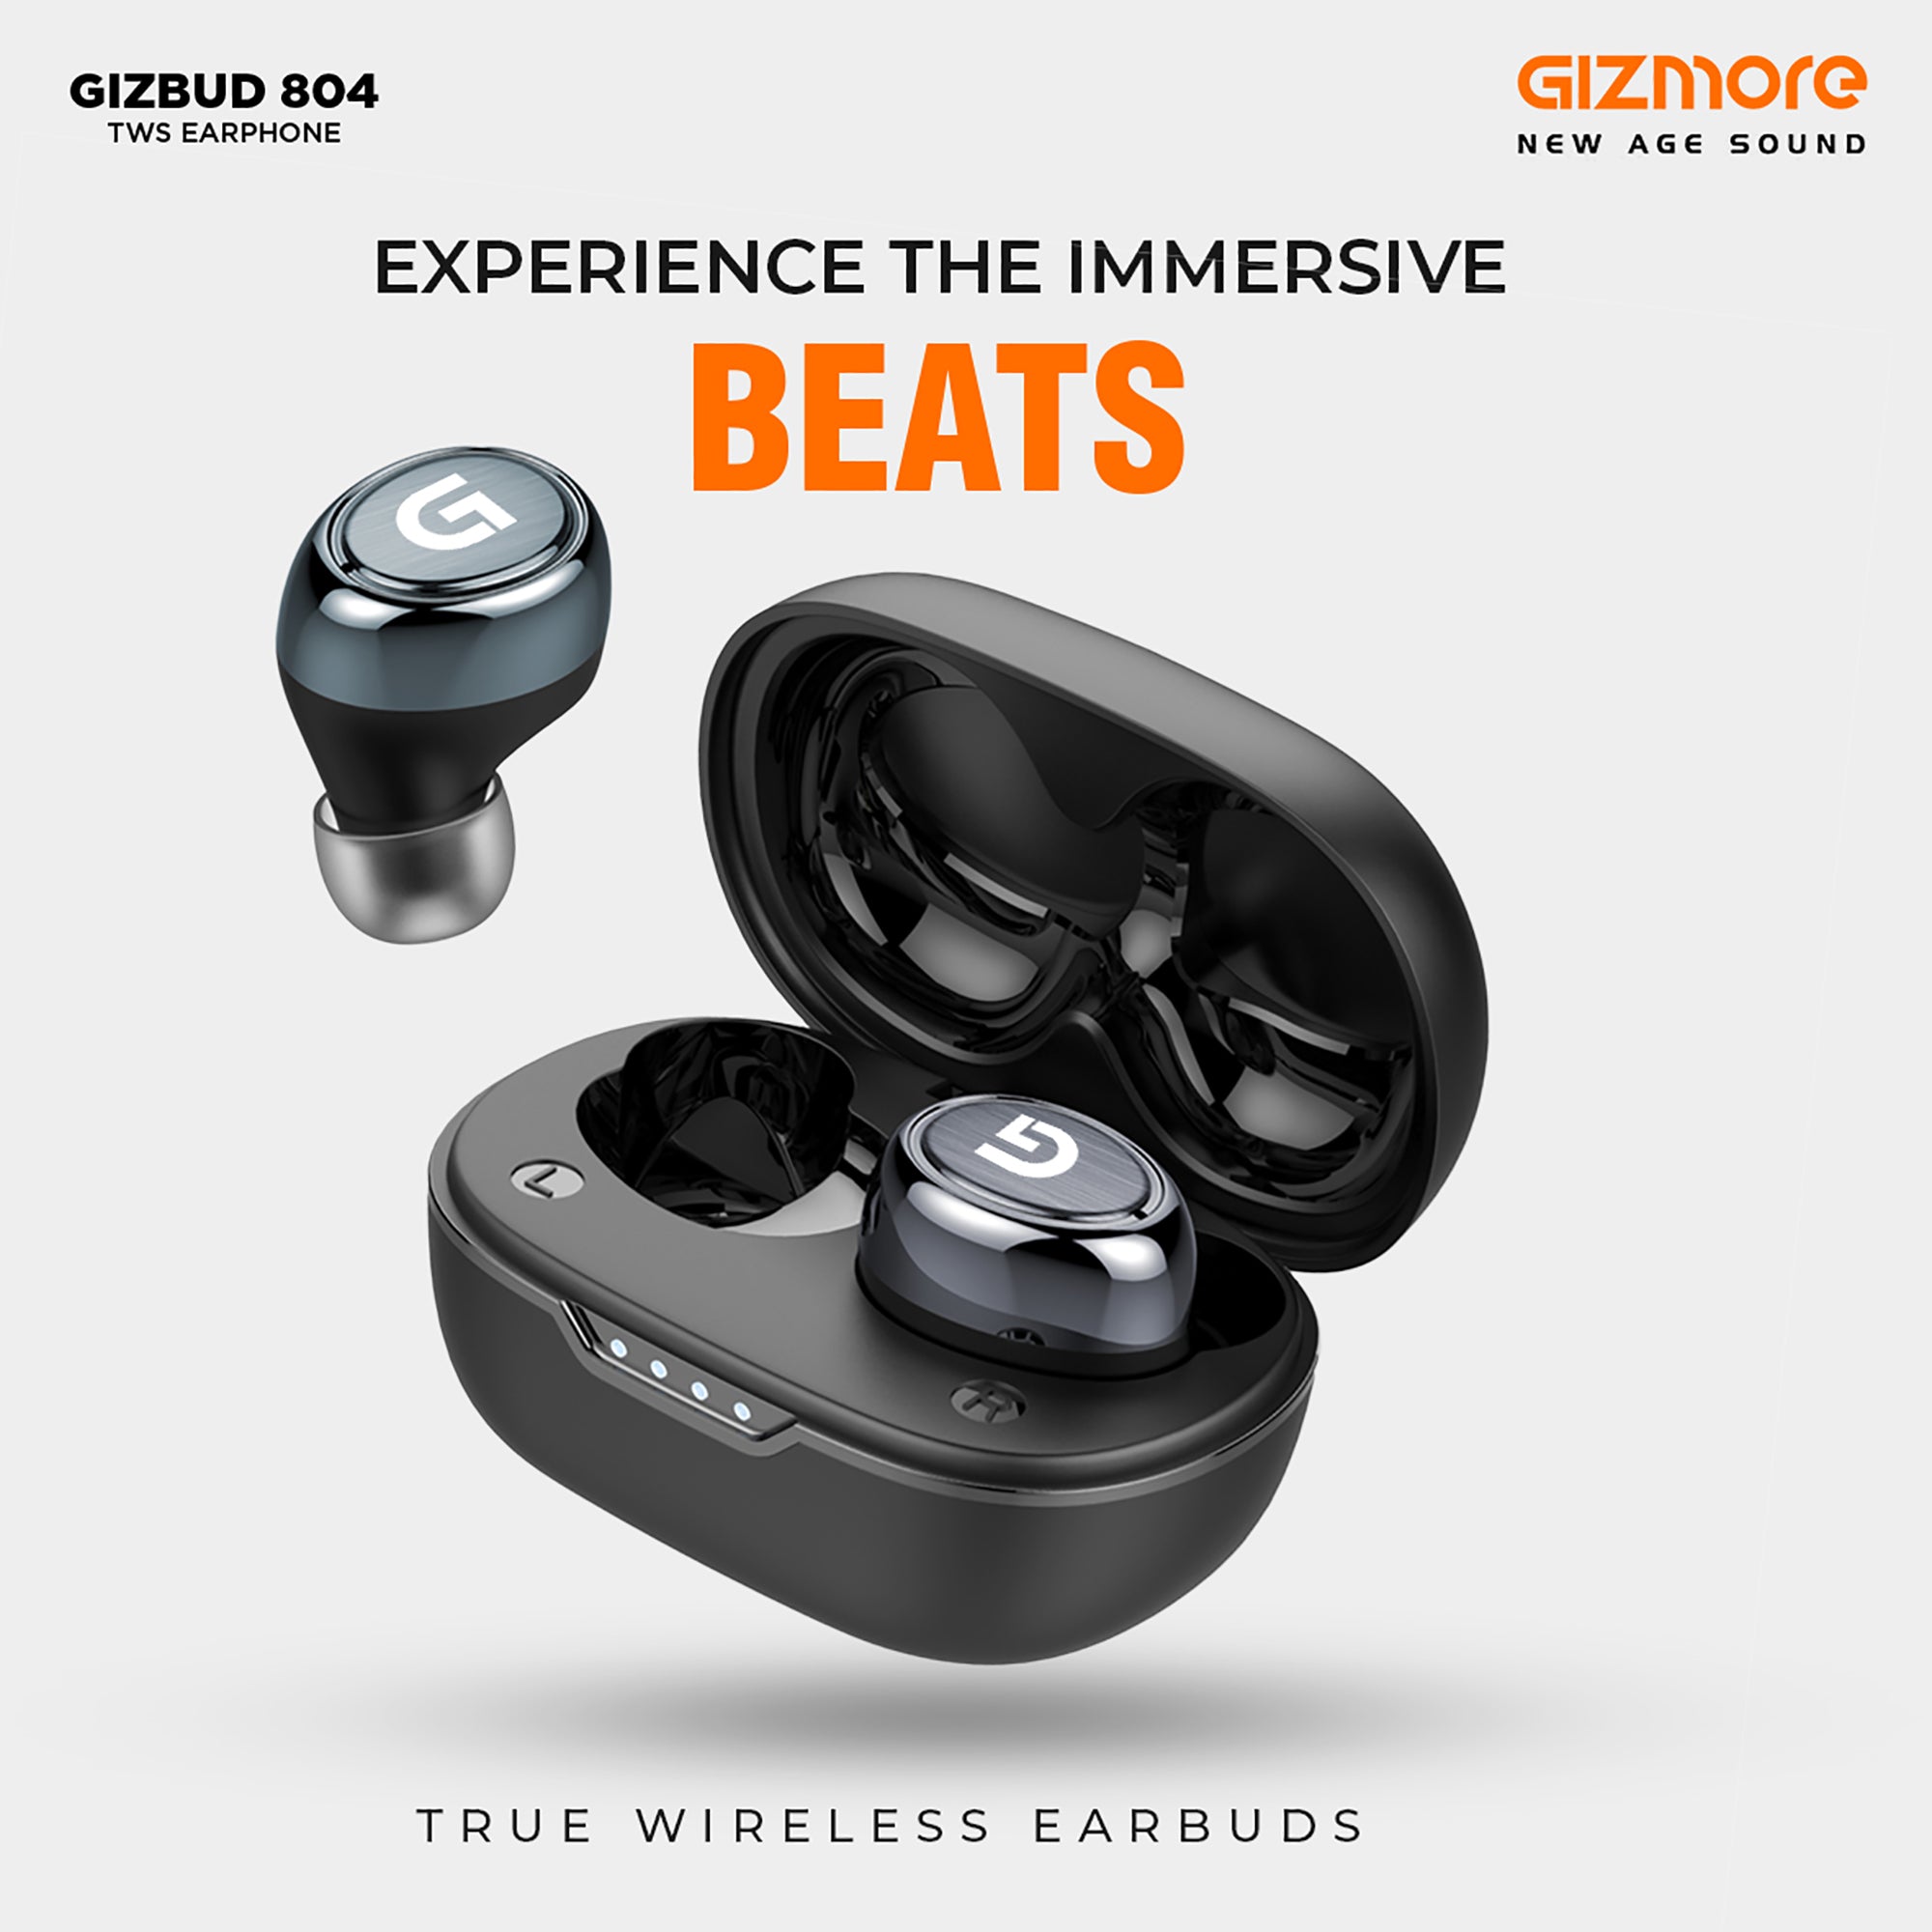 GIZMORE TWS 804 Bluetooth 5.0 in-Ear Wireless Earbuds HD Stereo Sound,Water Resistance, 20 Hrs Playtime, Touch Control, and Voice Assistance